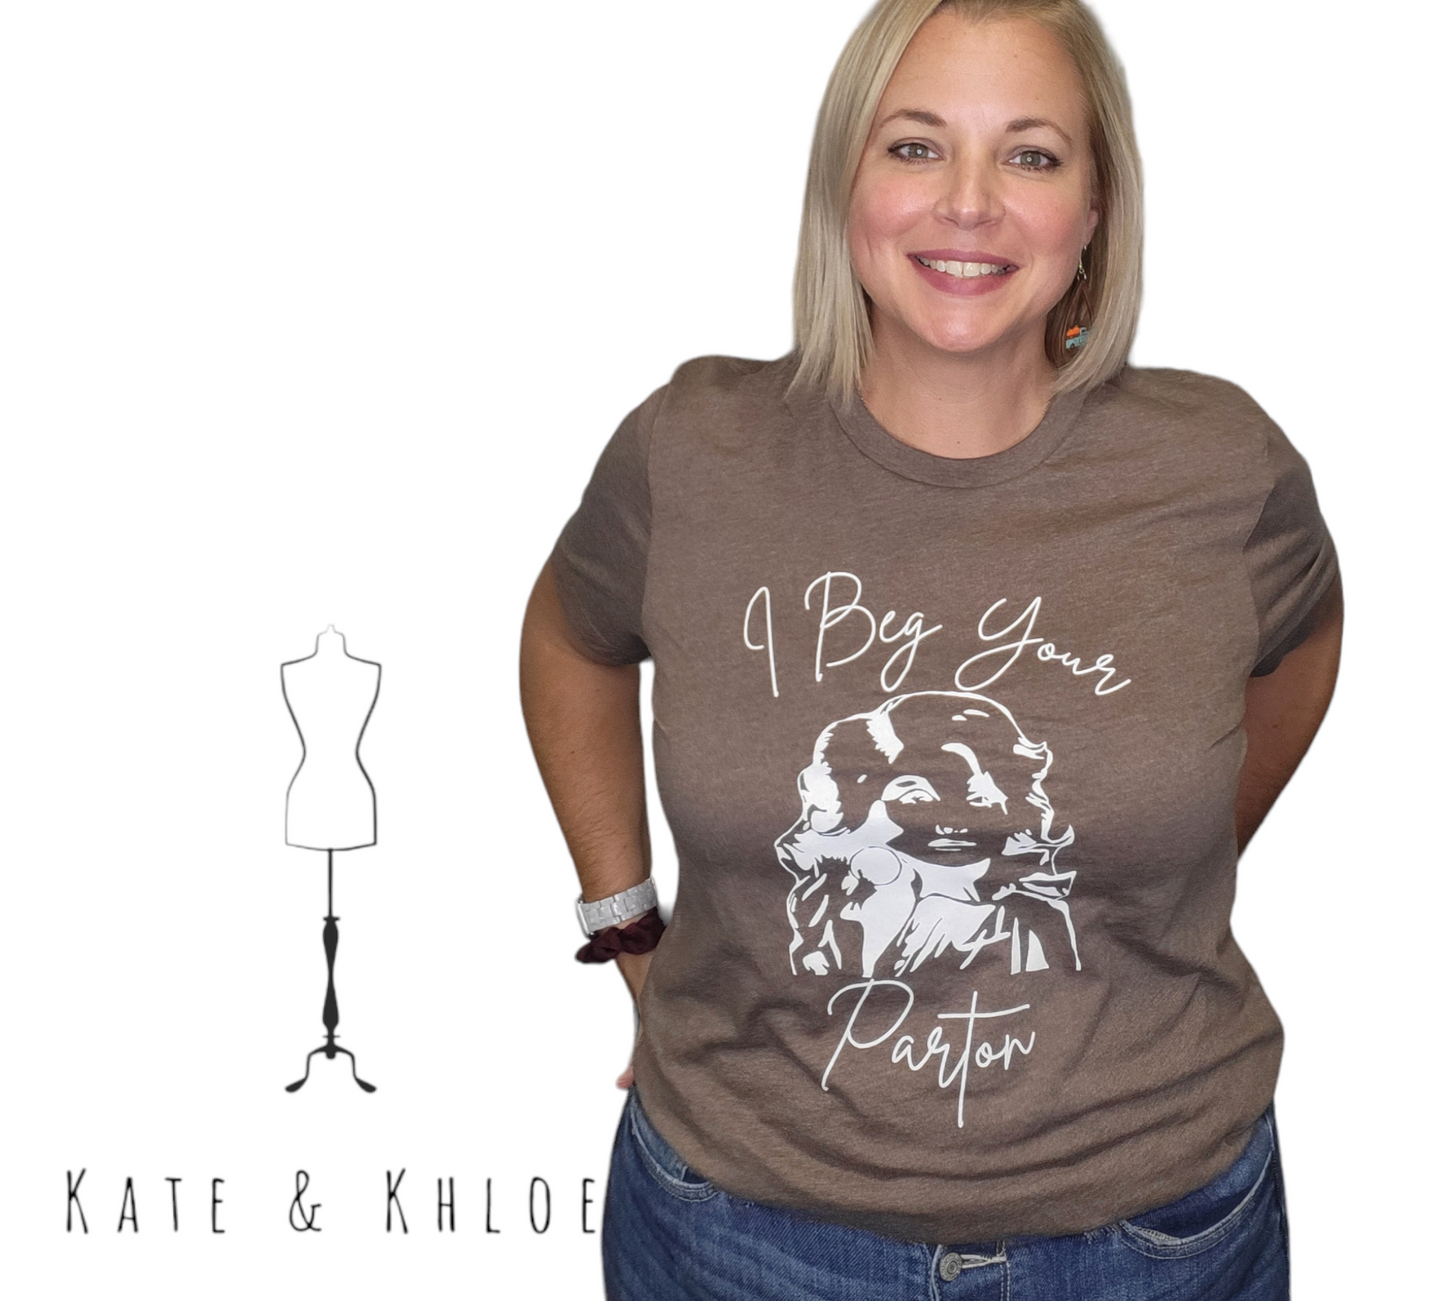 I Beg Your Parton! Graphic Tee in Heathered Brown